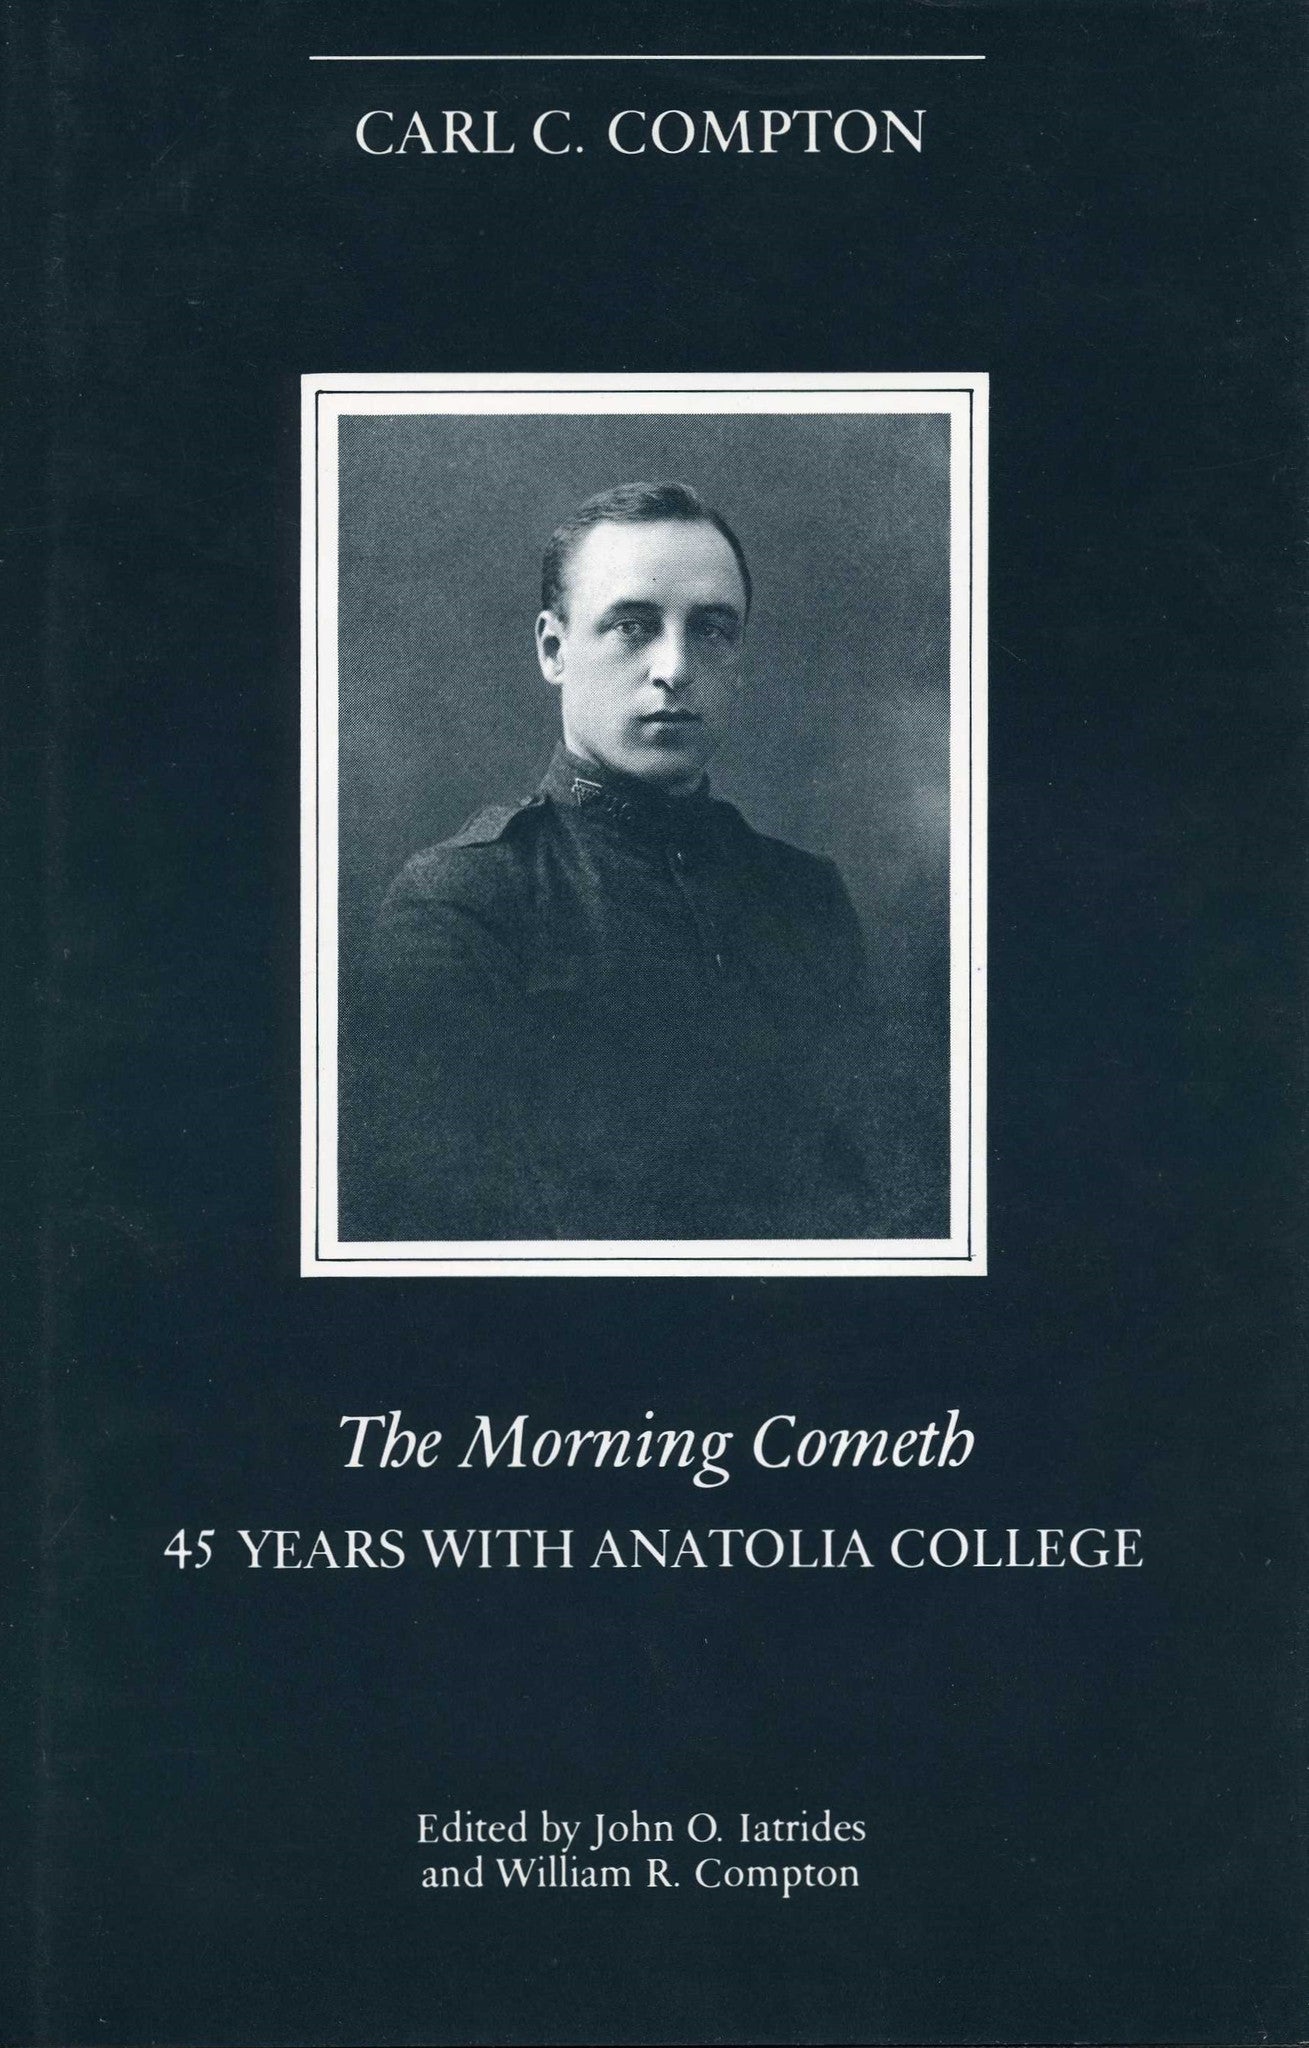 MORNING COMETH:  45 YEARS WITH ANATOLIA COLLEGE